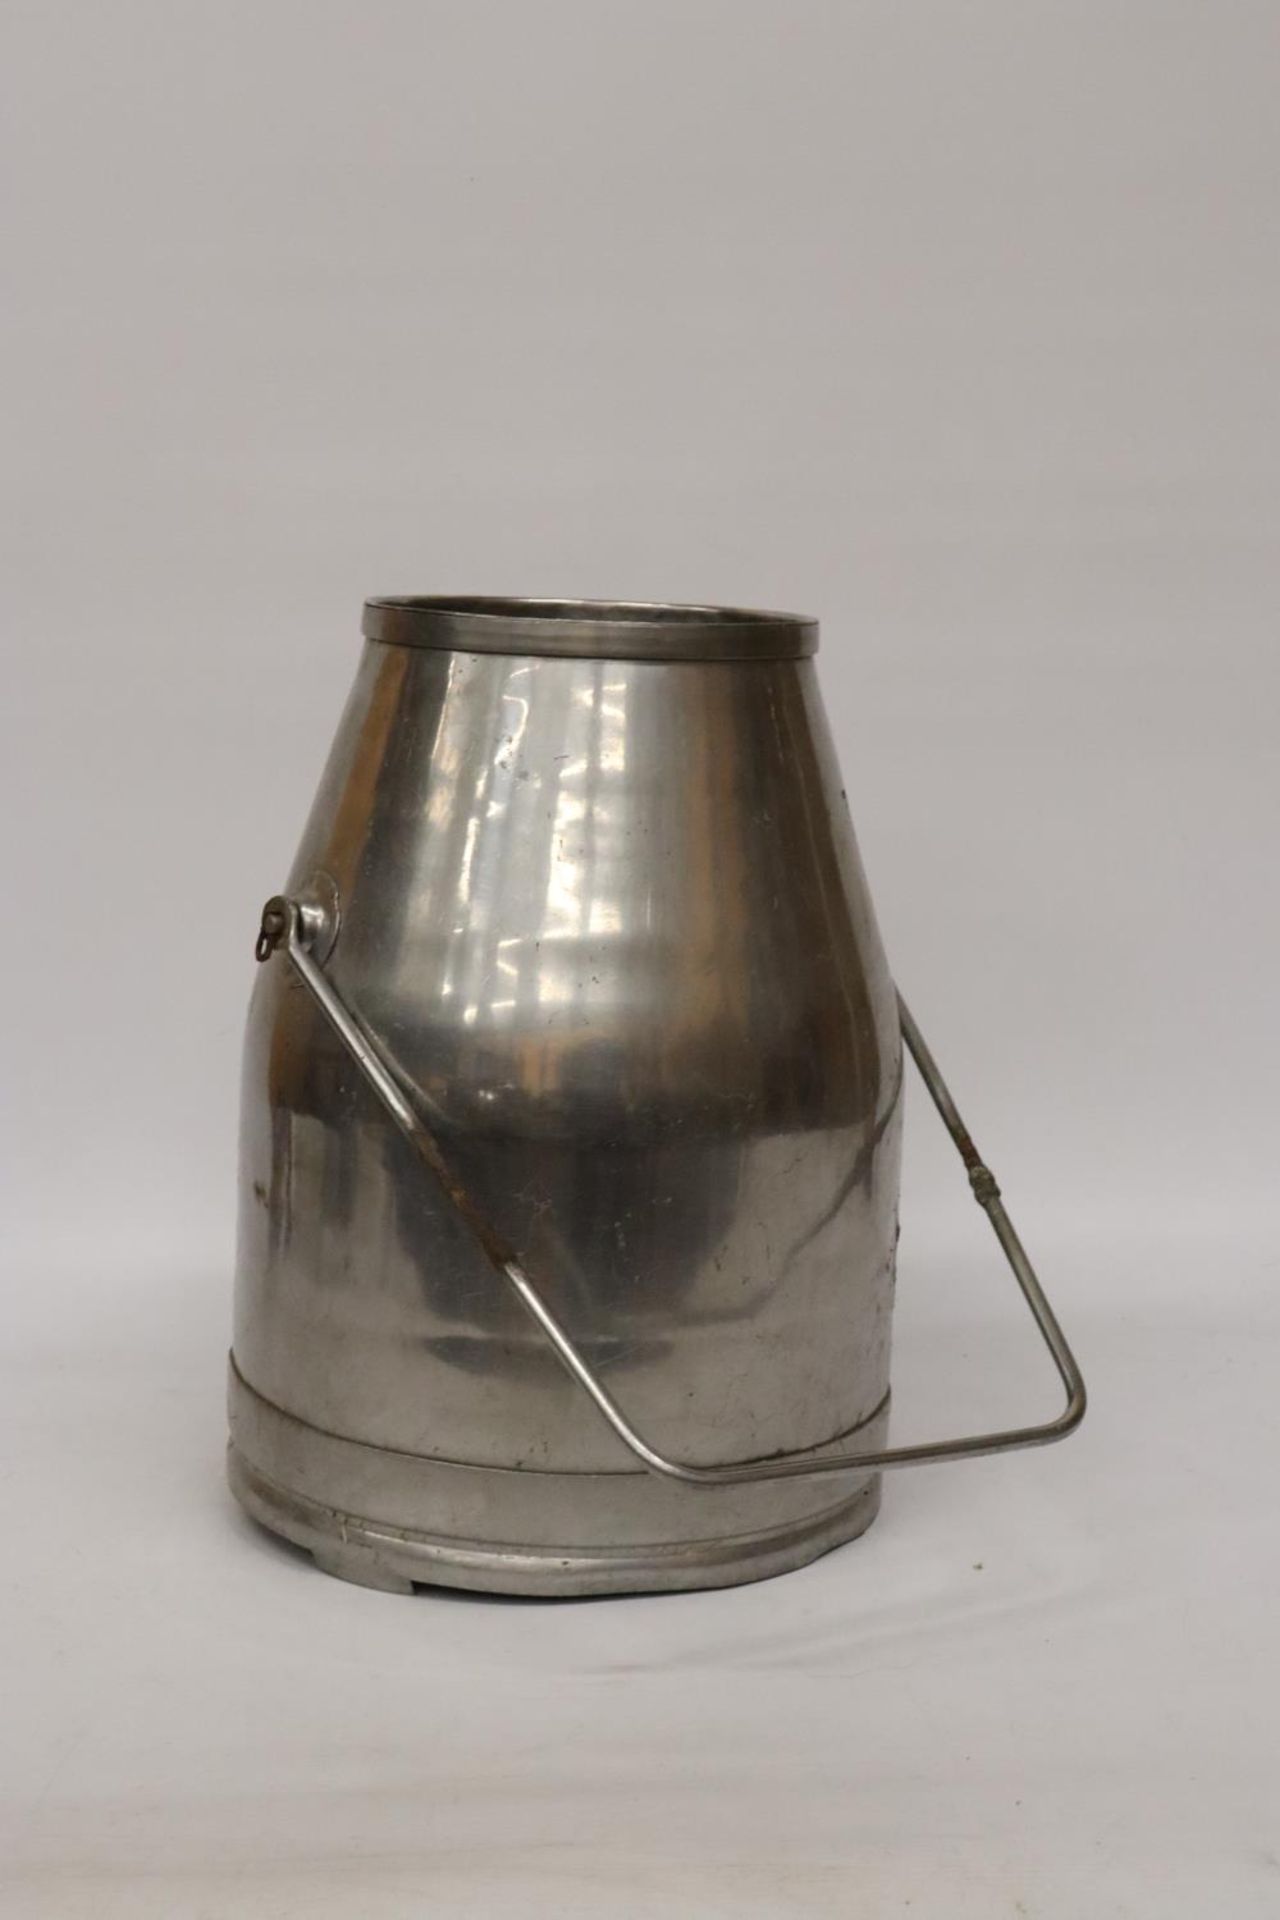 A STAINLESS STEEL MILK CHURN, HEIGHT APPROX 40CM - Image 2 of 4